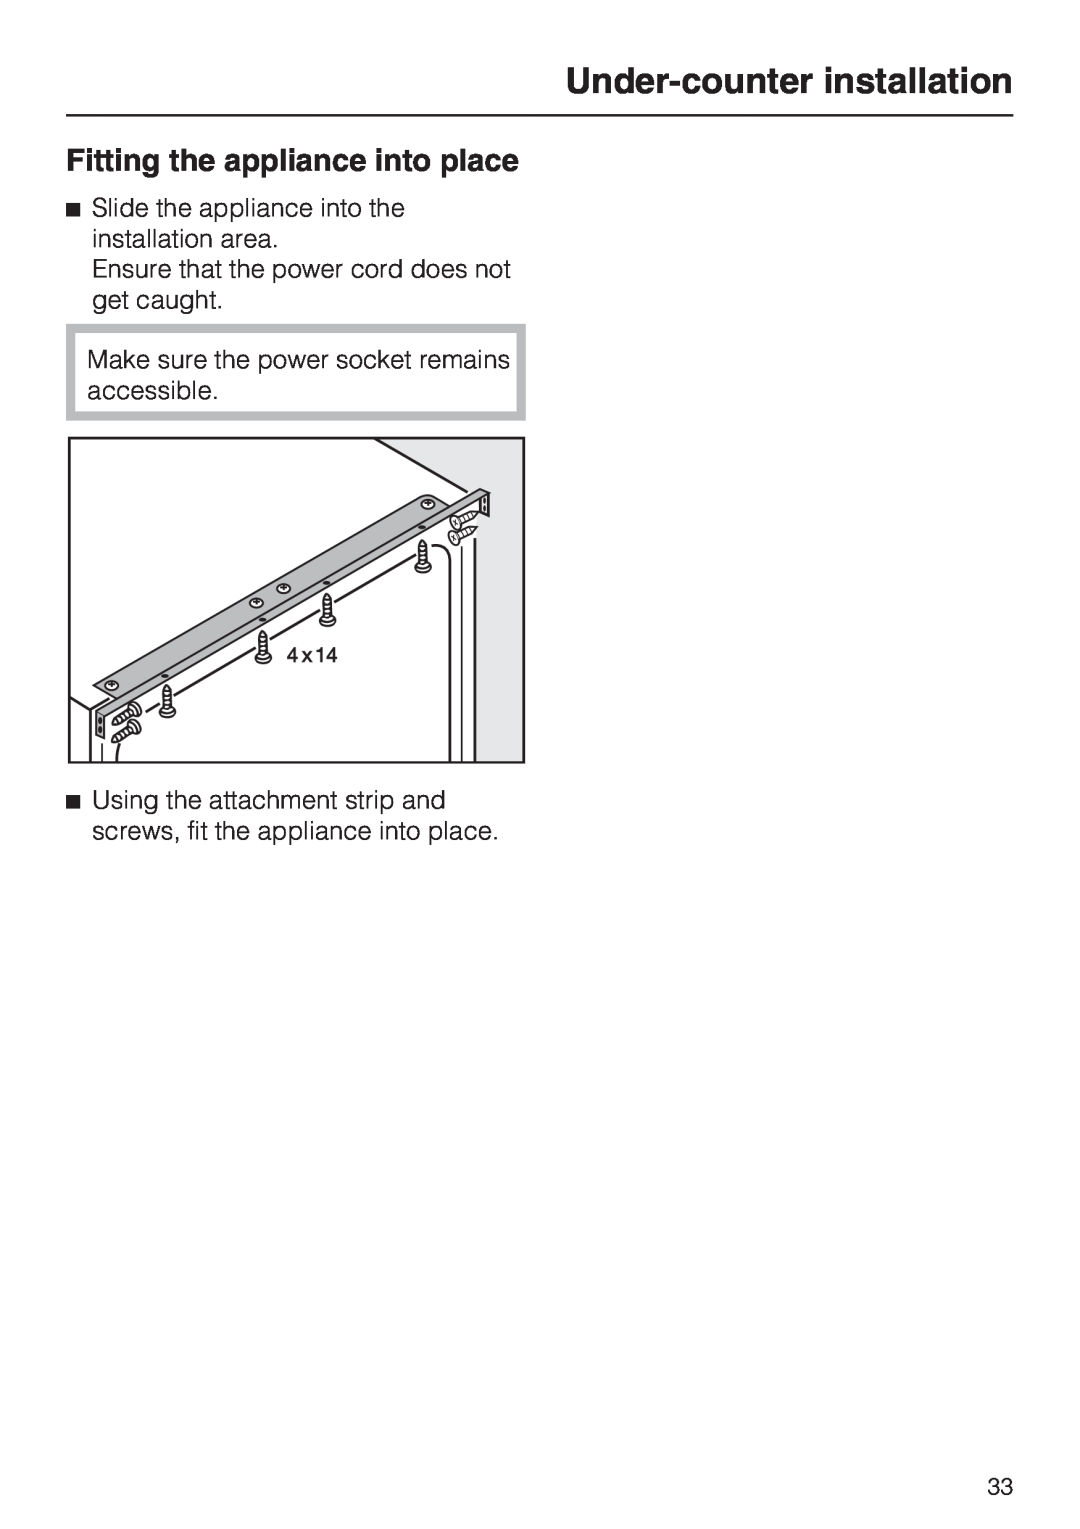 Miele KWT4154UG1 installation instructions Fitting the appliance into place, Under-counterinstallation 